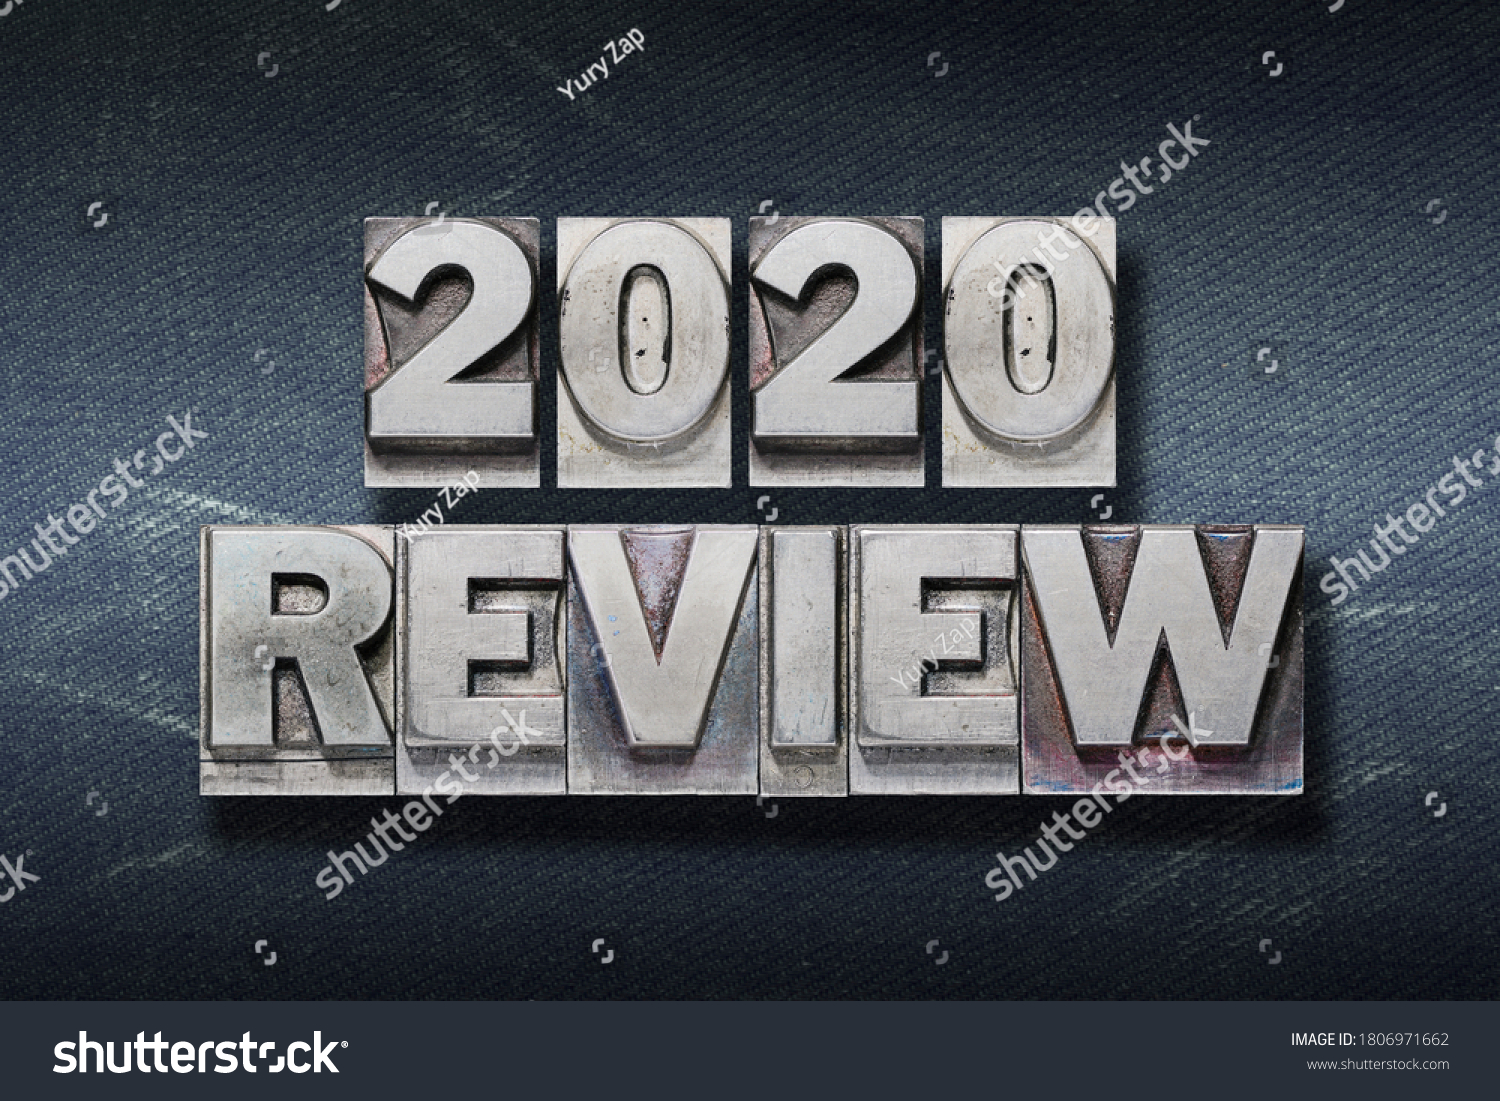 review 2020 phrase made from metallic letterpress on dark jeans background #1806971662